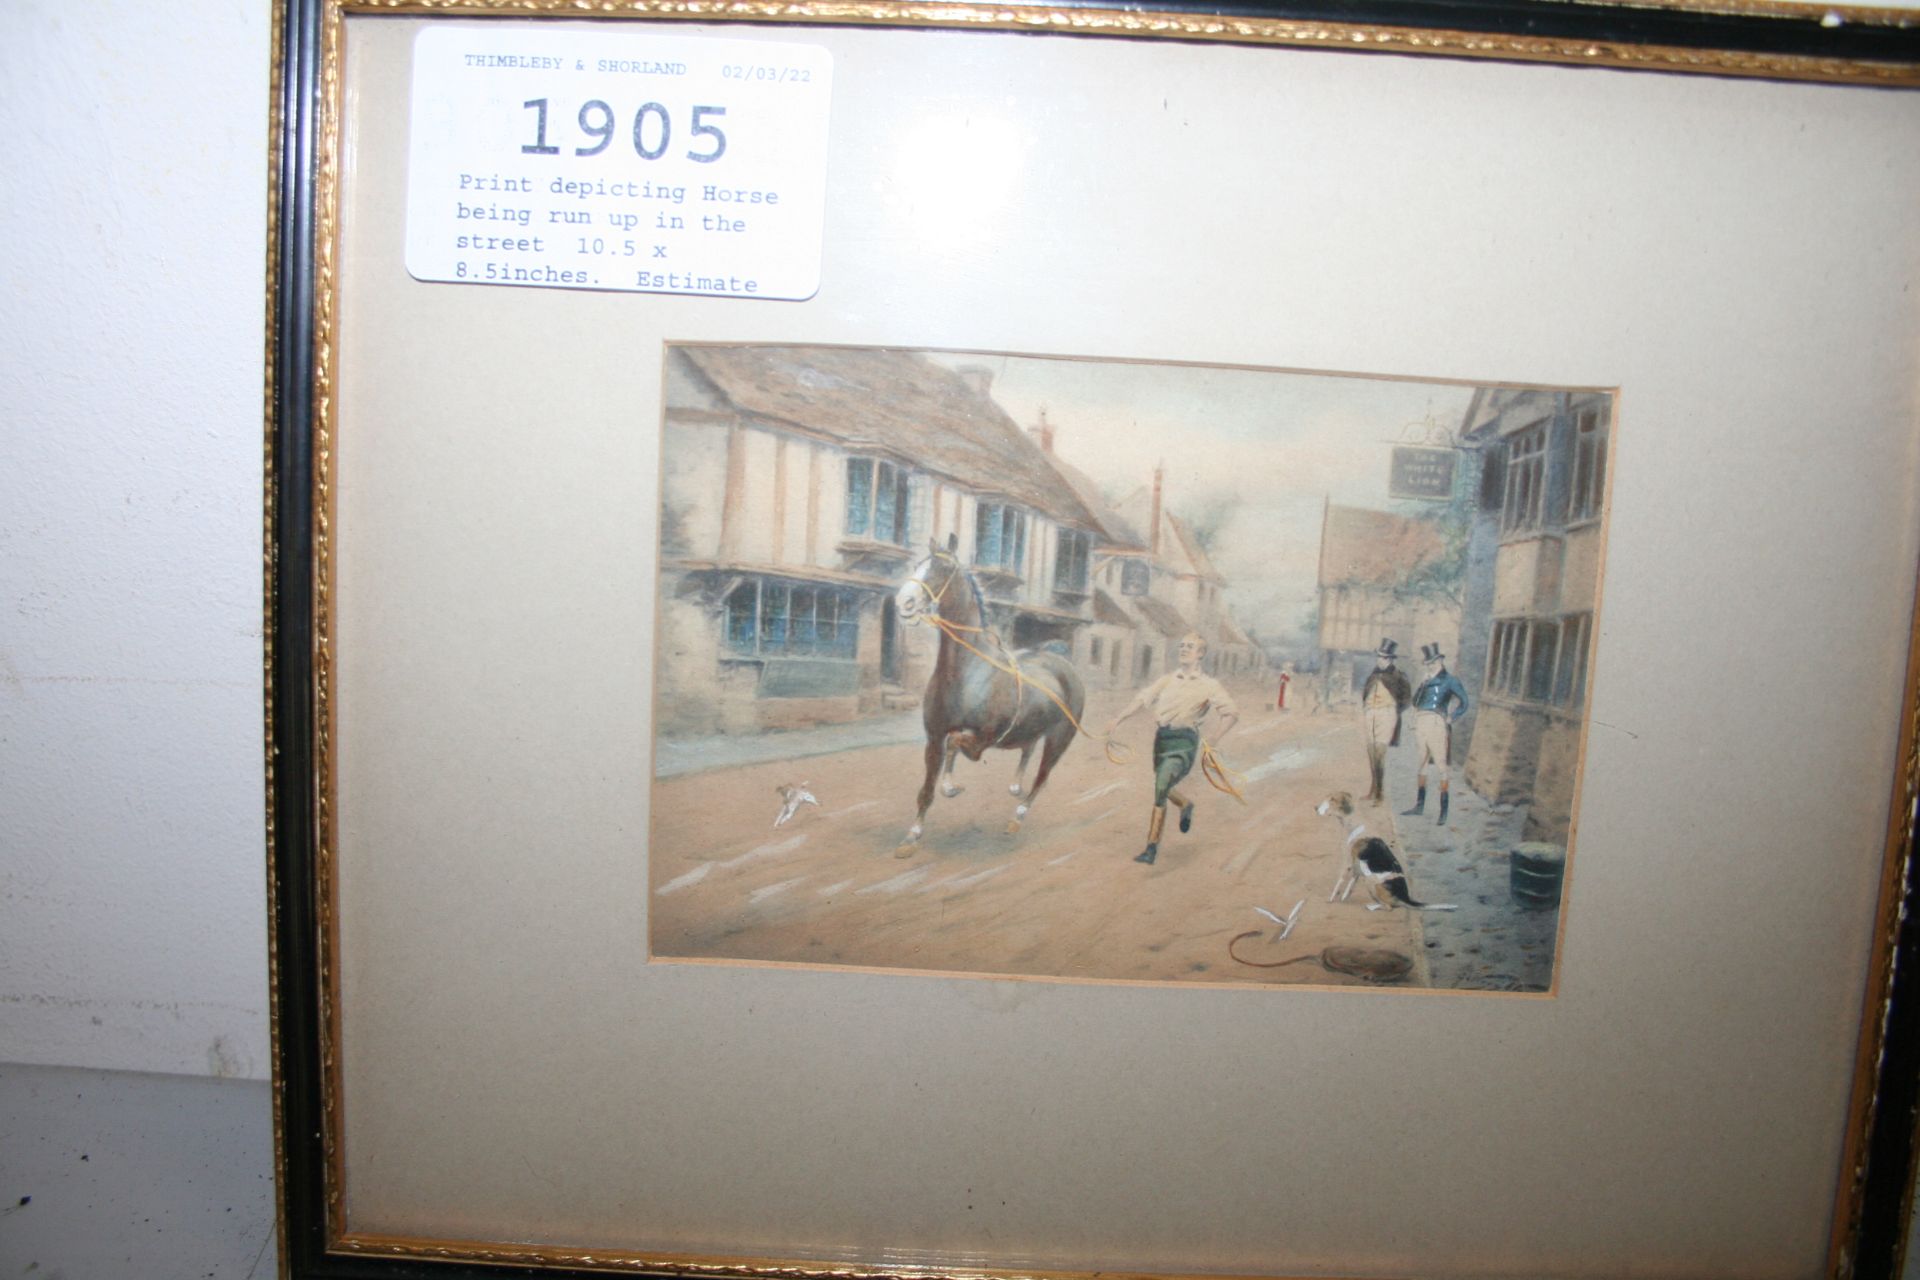 Print depicting Horse being run up in the street